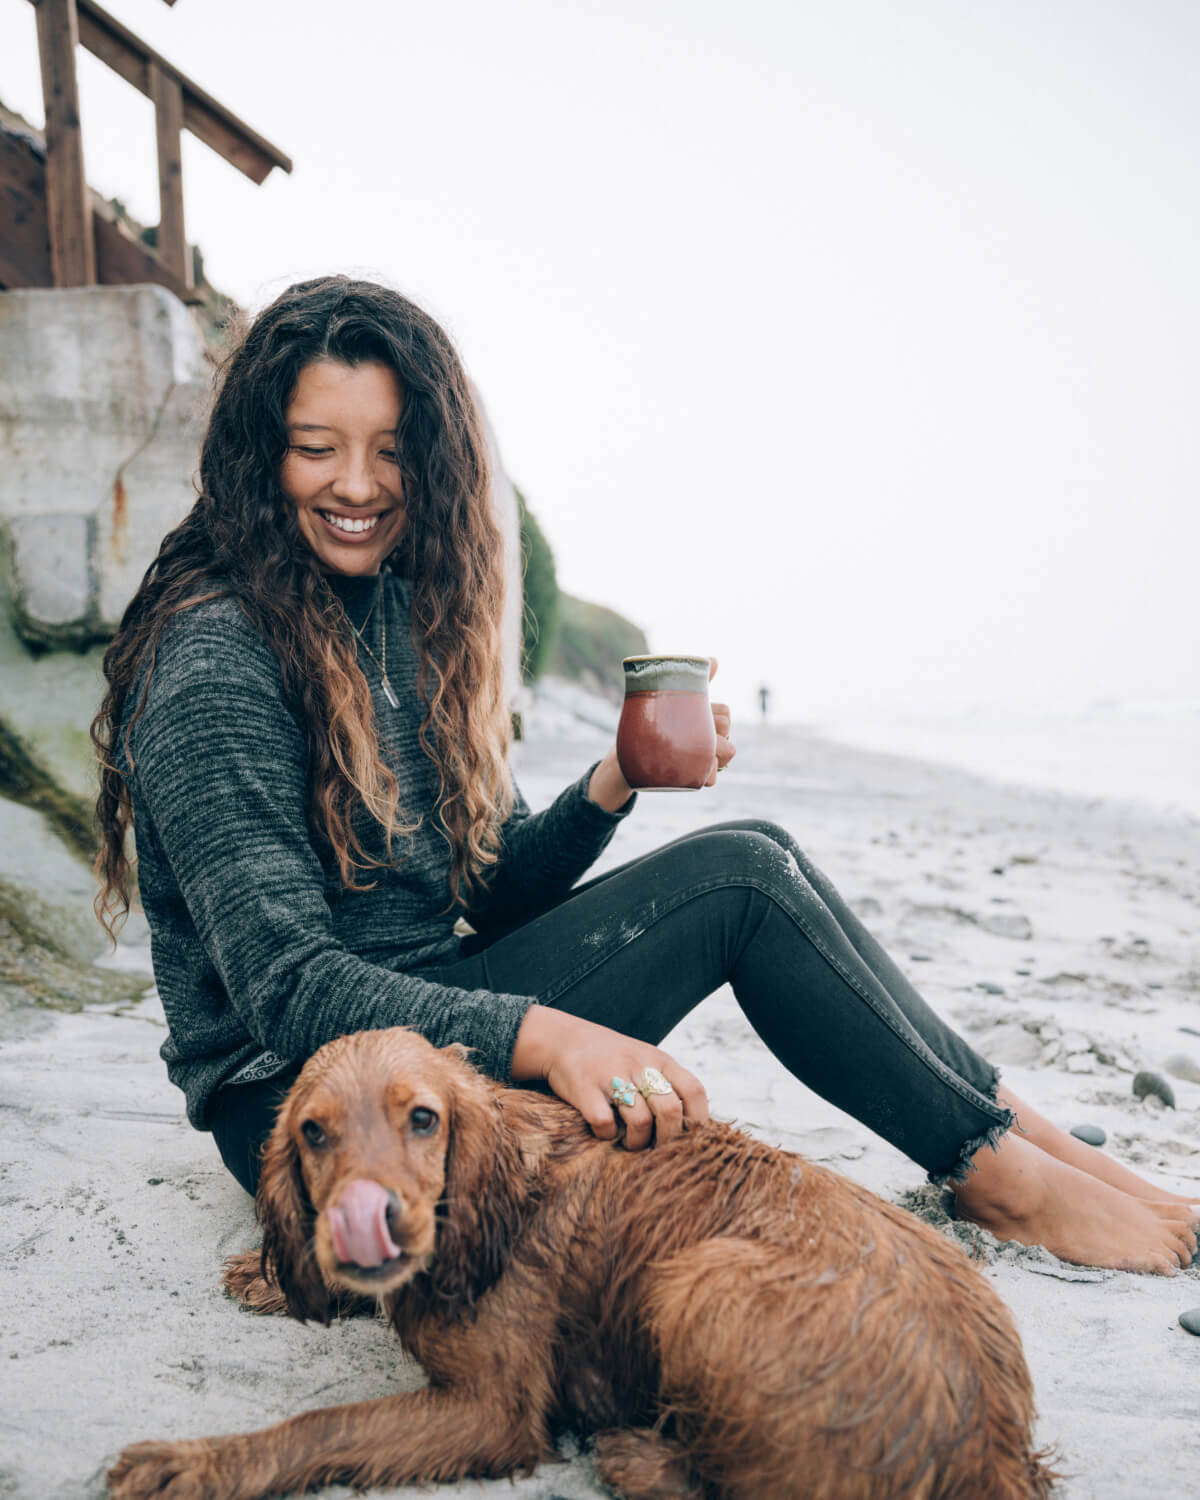 A woman petting her dog and holding a cup in a beach